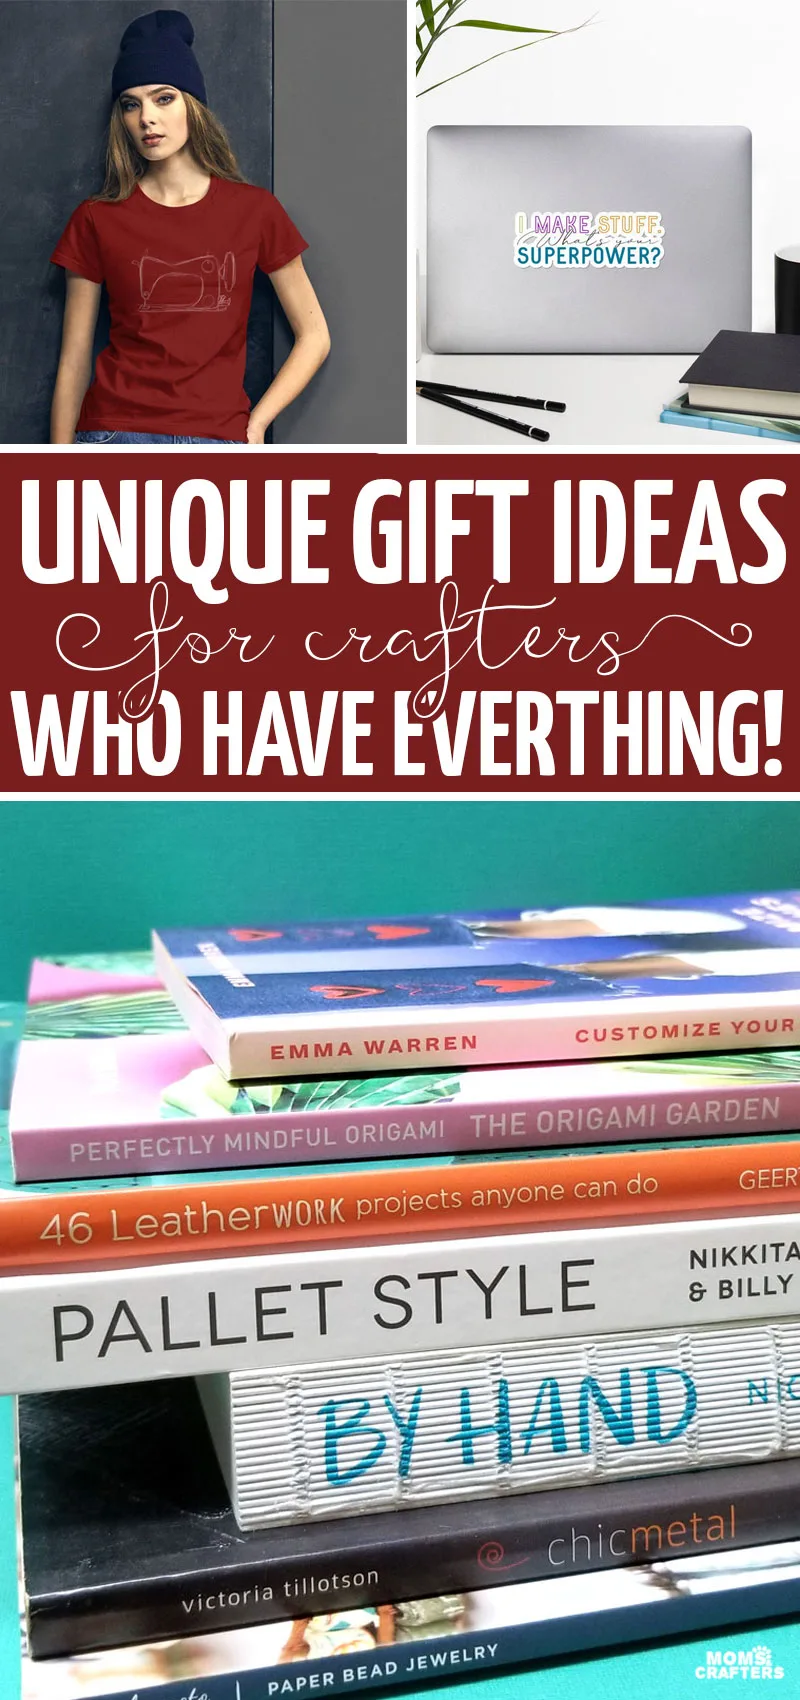 20+ Gifts for the crafter who has everything - these craft gifts are perfect for creatives, craft rooms, people who want craft books and more!